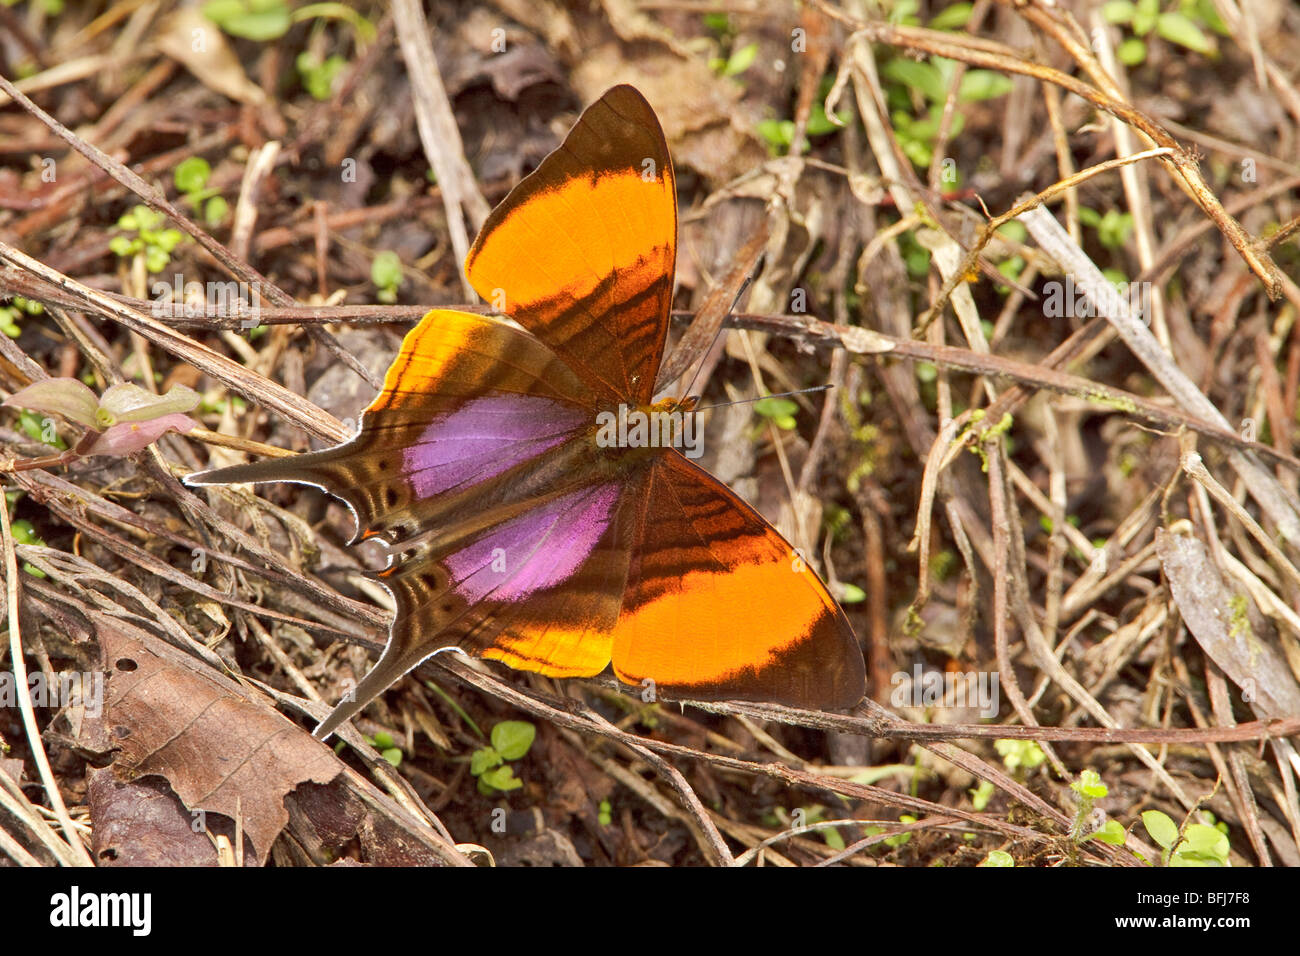 A butterfly in the Milpe reserve in northwest Ecuador. Stock Photo